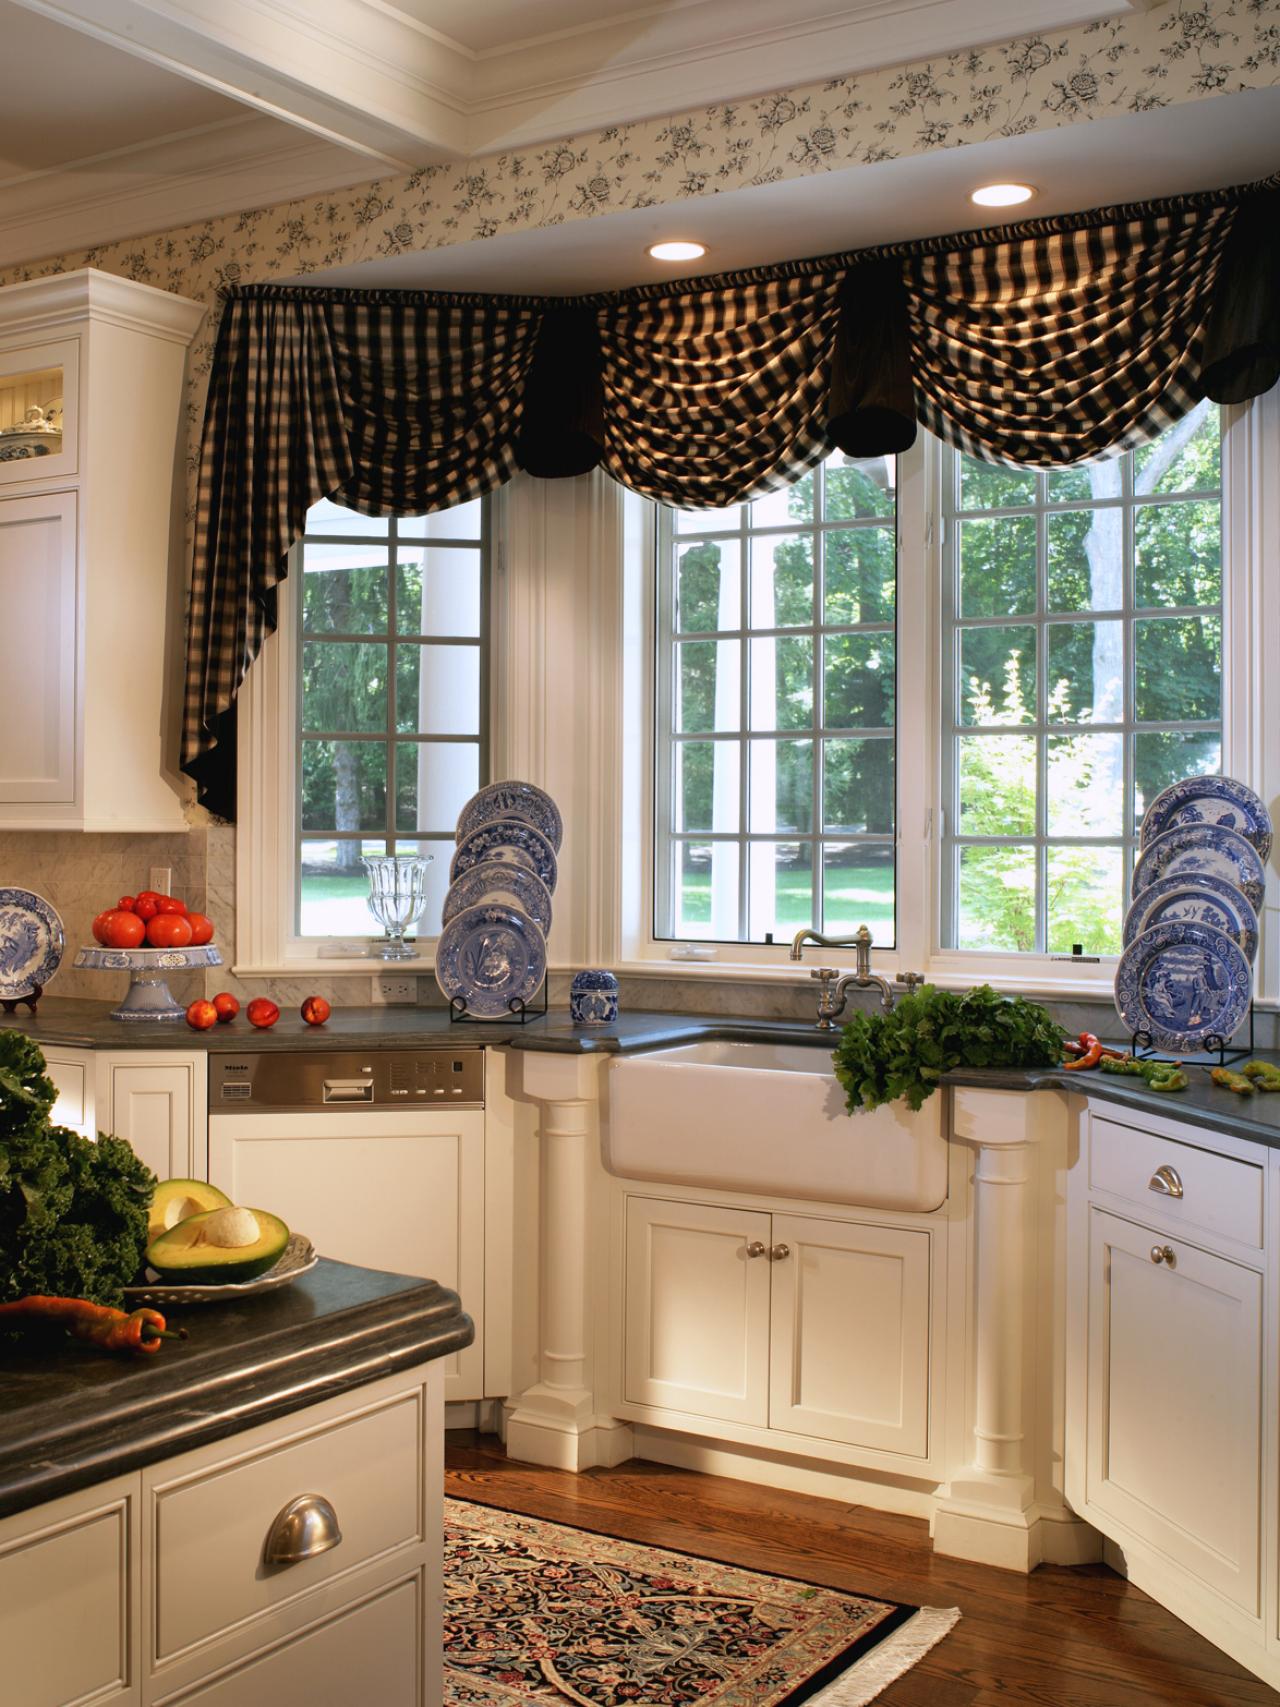 Kitchen Curtains That Will Warm Up The Heart Of Your Home Diy